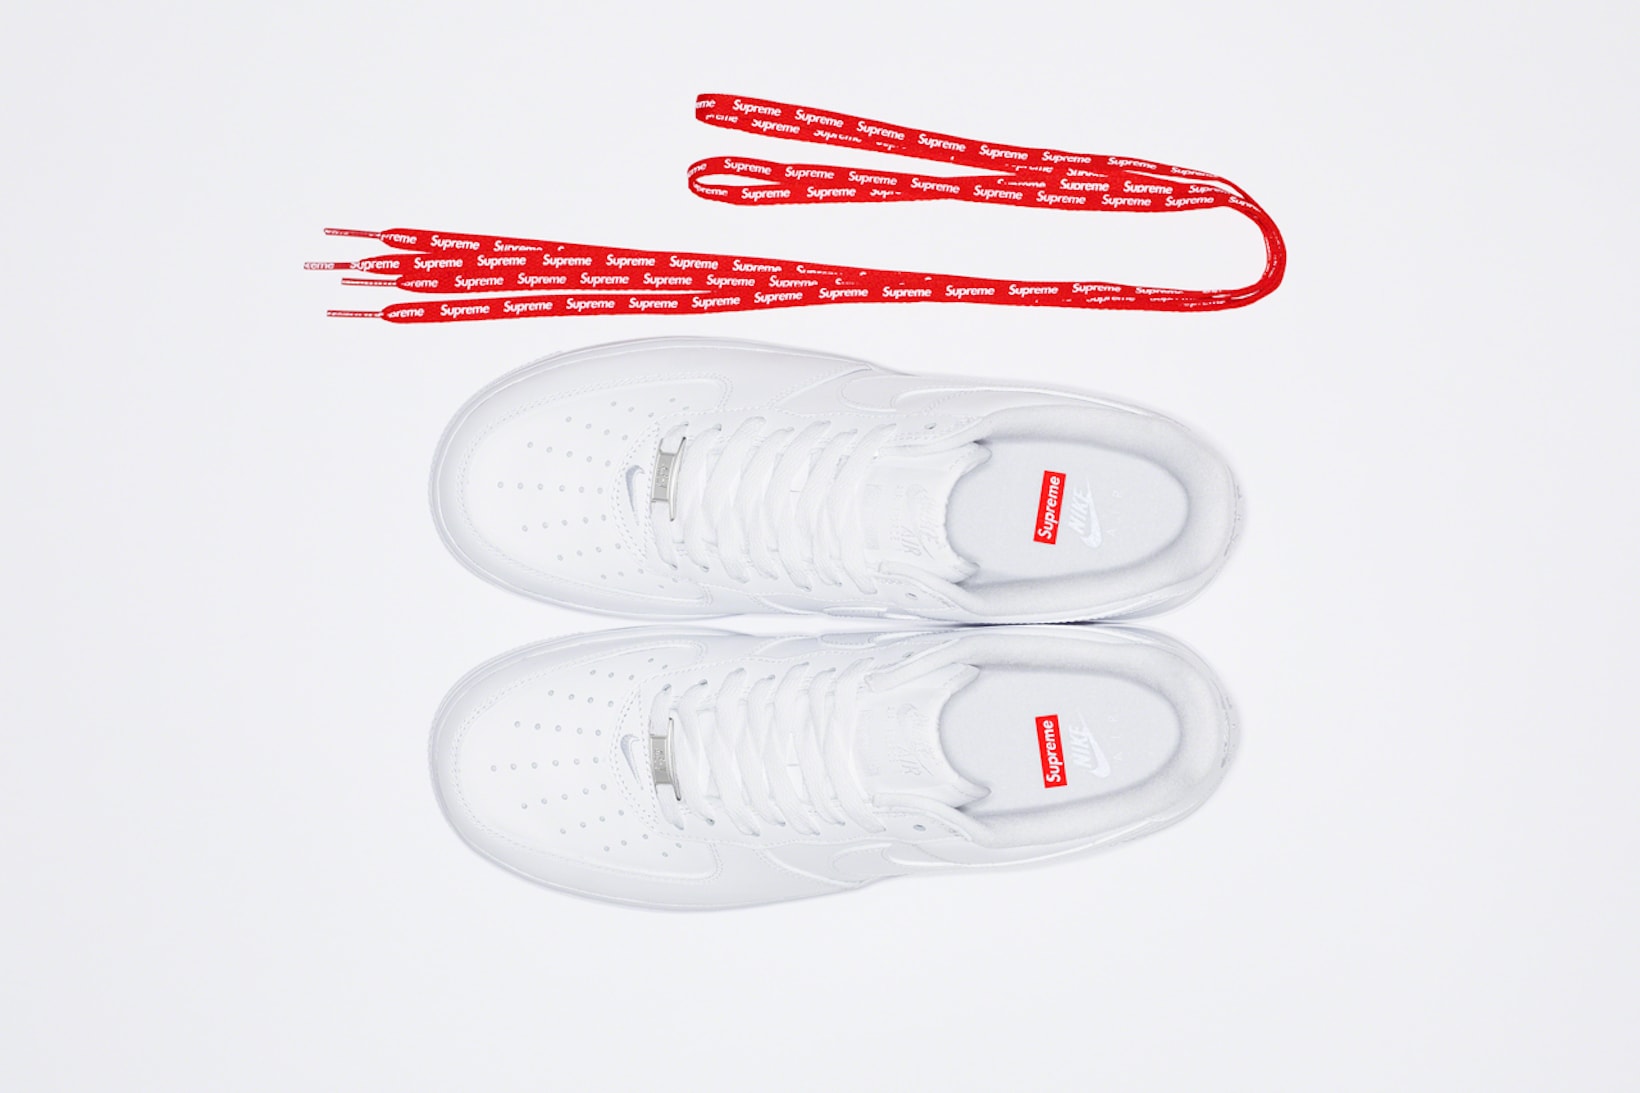 SUPREME FORCES AVAILABLE IN-STORE PICK UP A FRESH PAIR OF ALL WHITES TODAY